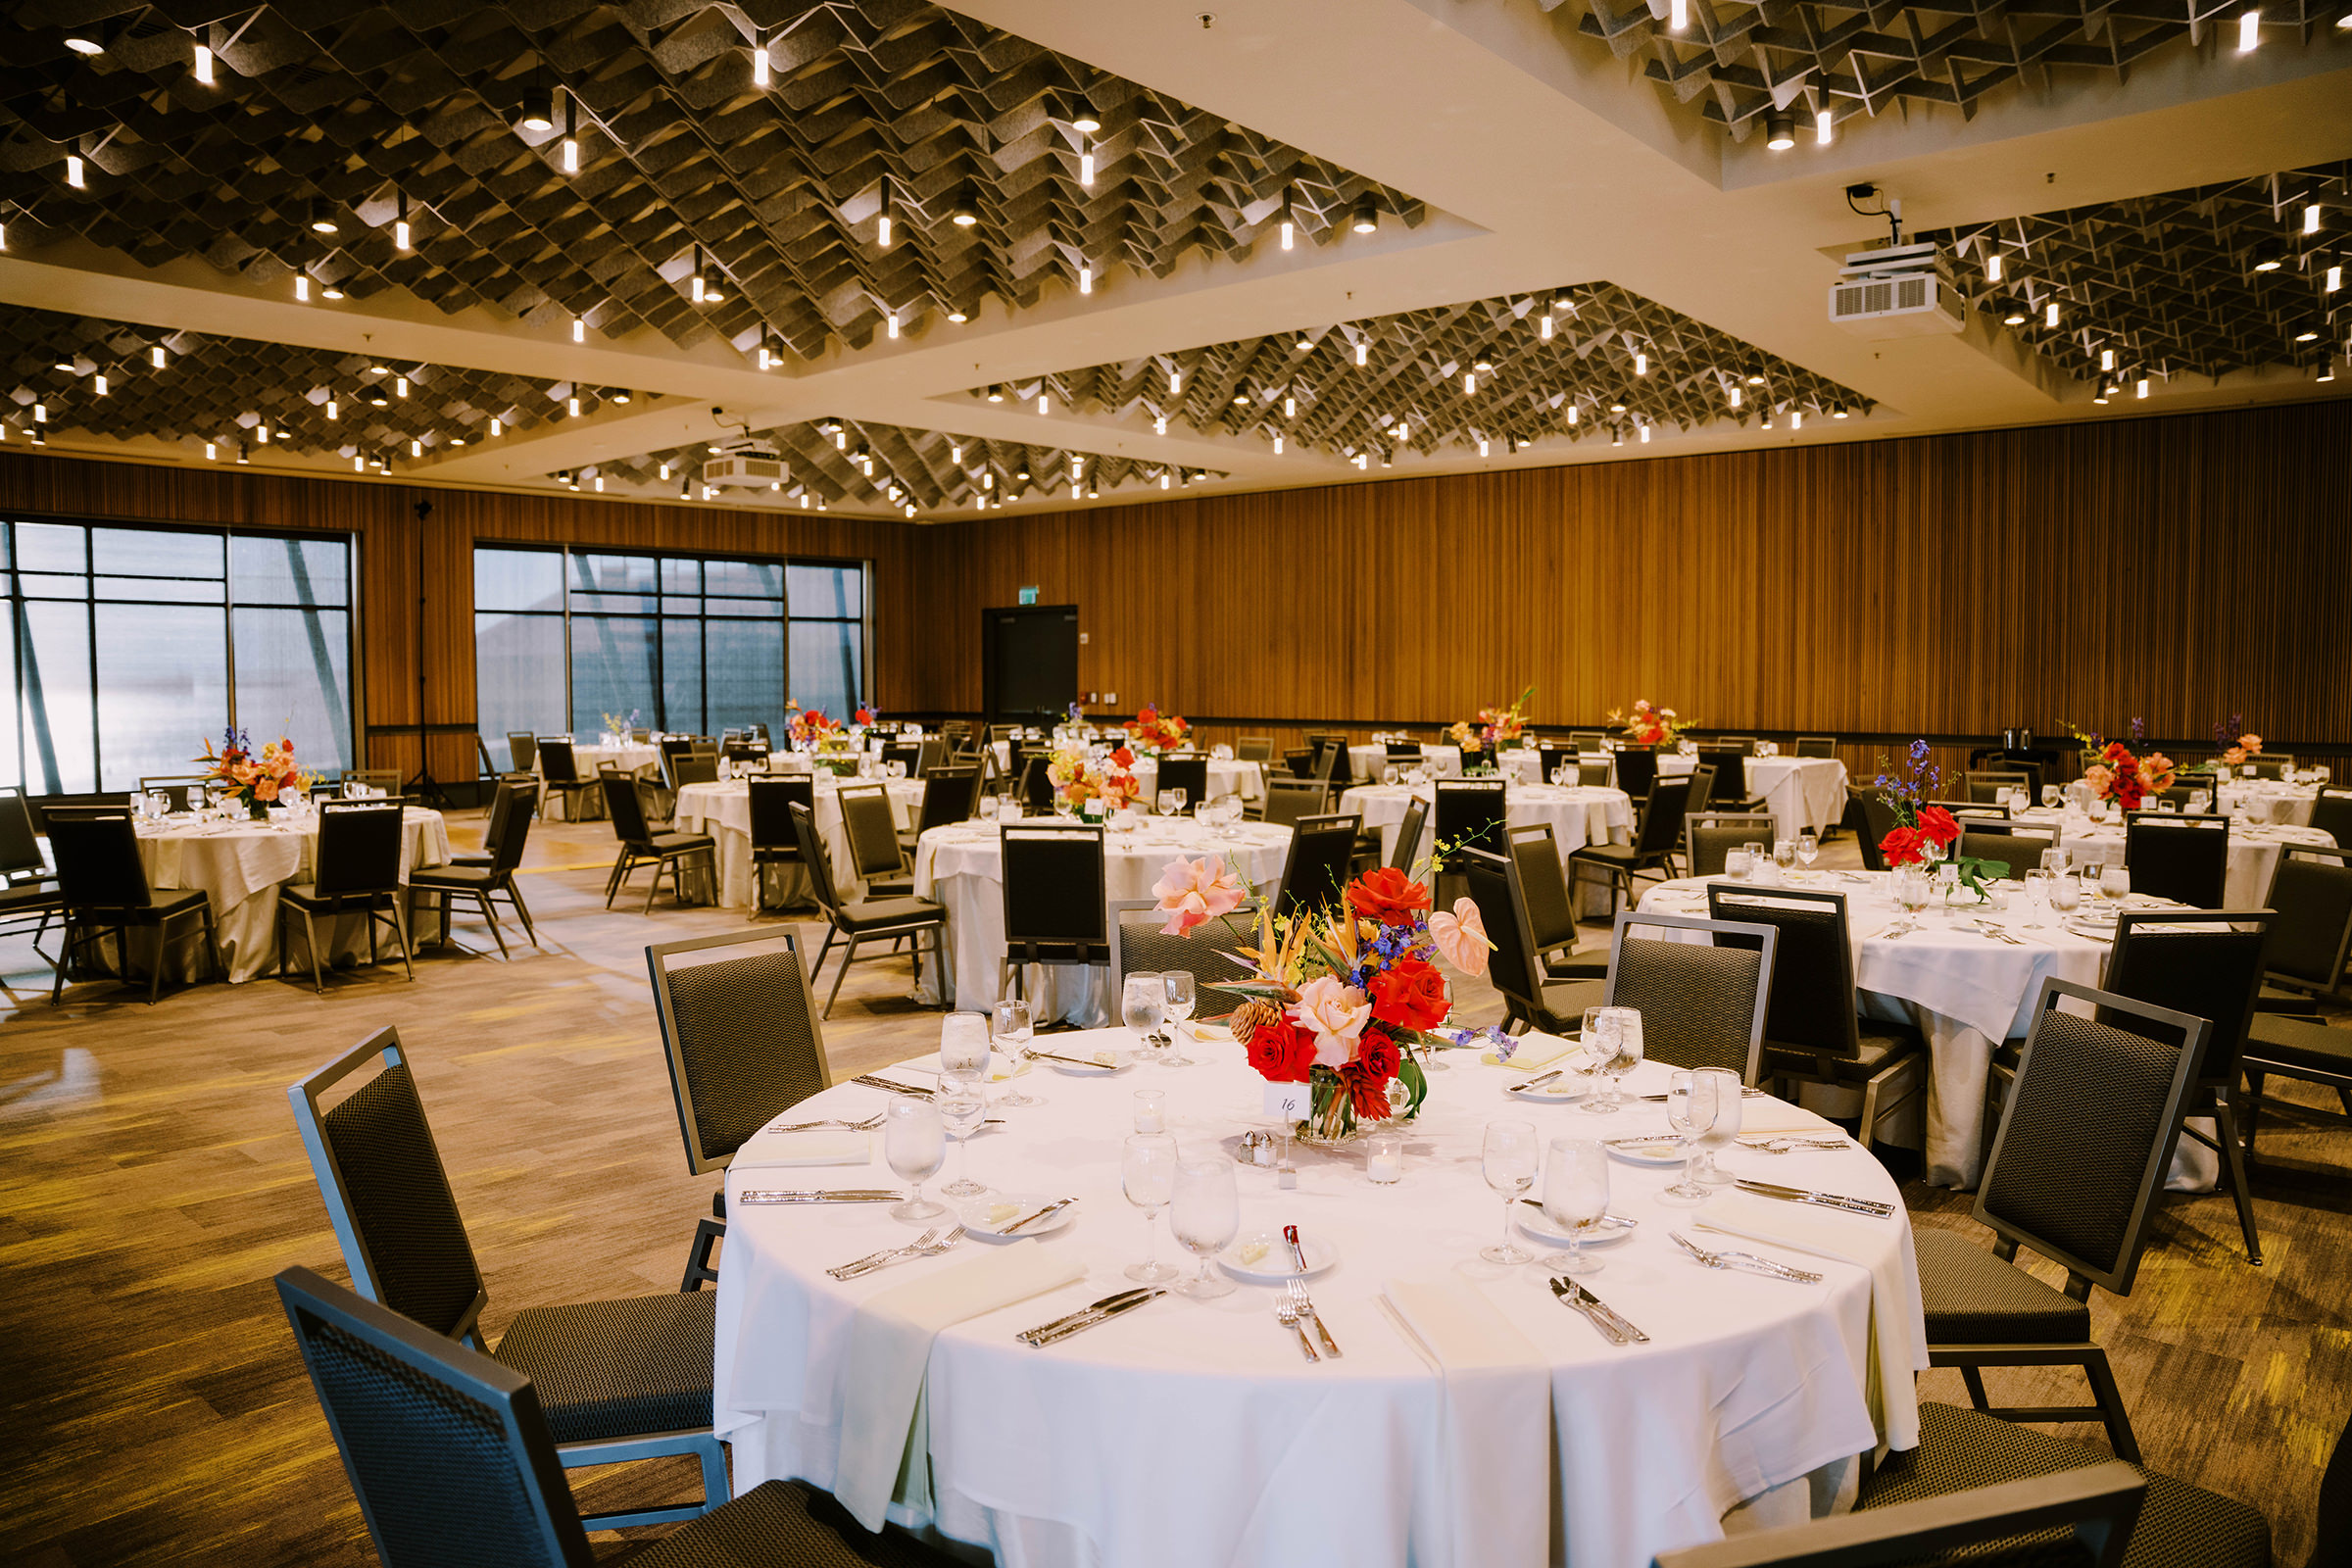 Joey and Dustin's wedding reception at the Bell Harbor Conference Center ballroom, florals by Bahtoh, designed and planned by Emerald Engagements